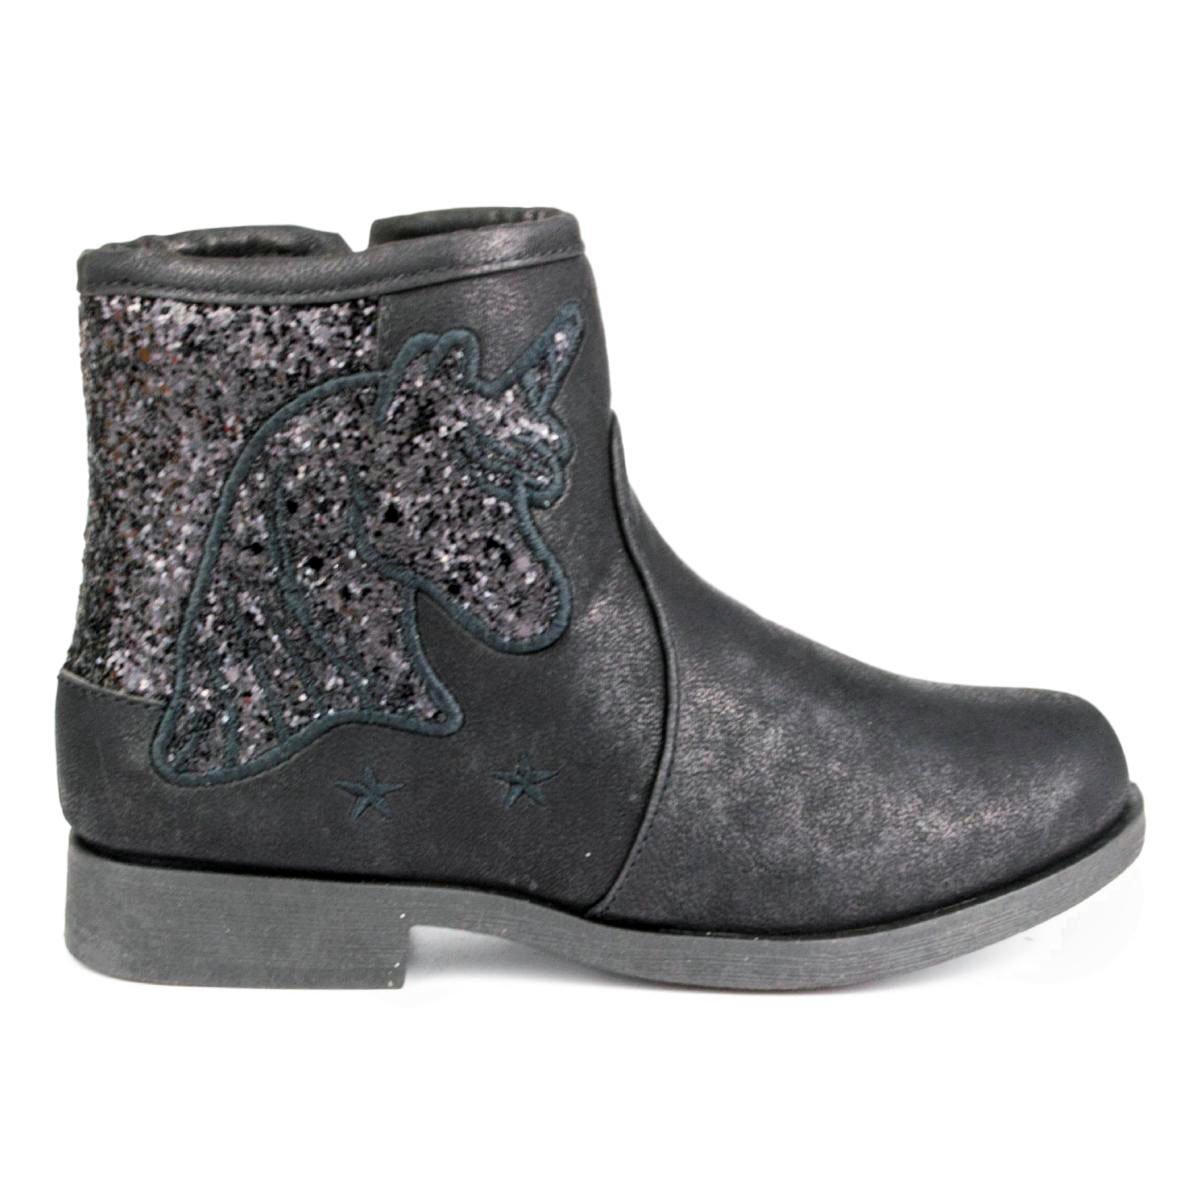 Girls Black Zip Up Ankle Boot - Watney Shoes 